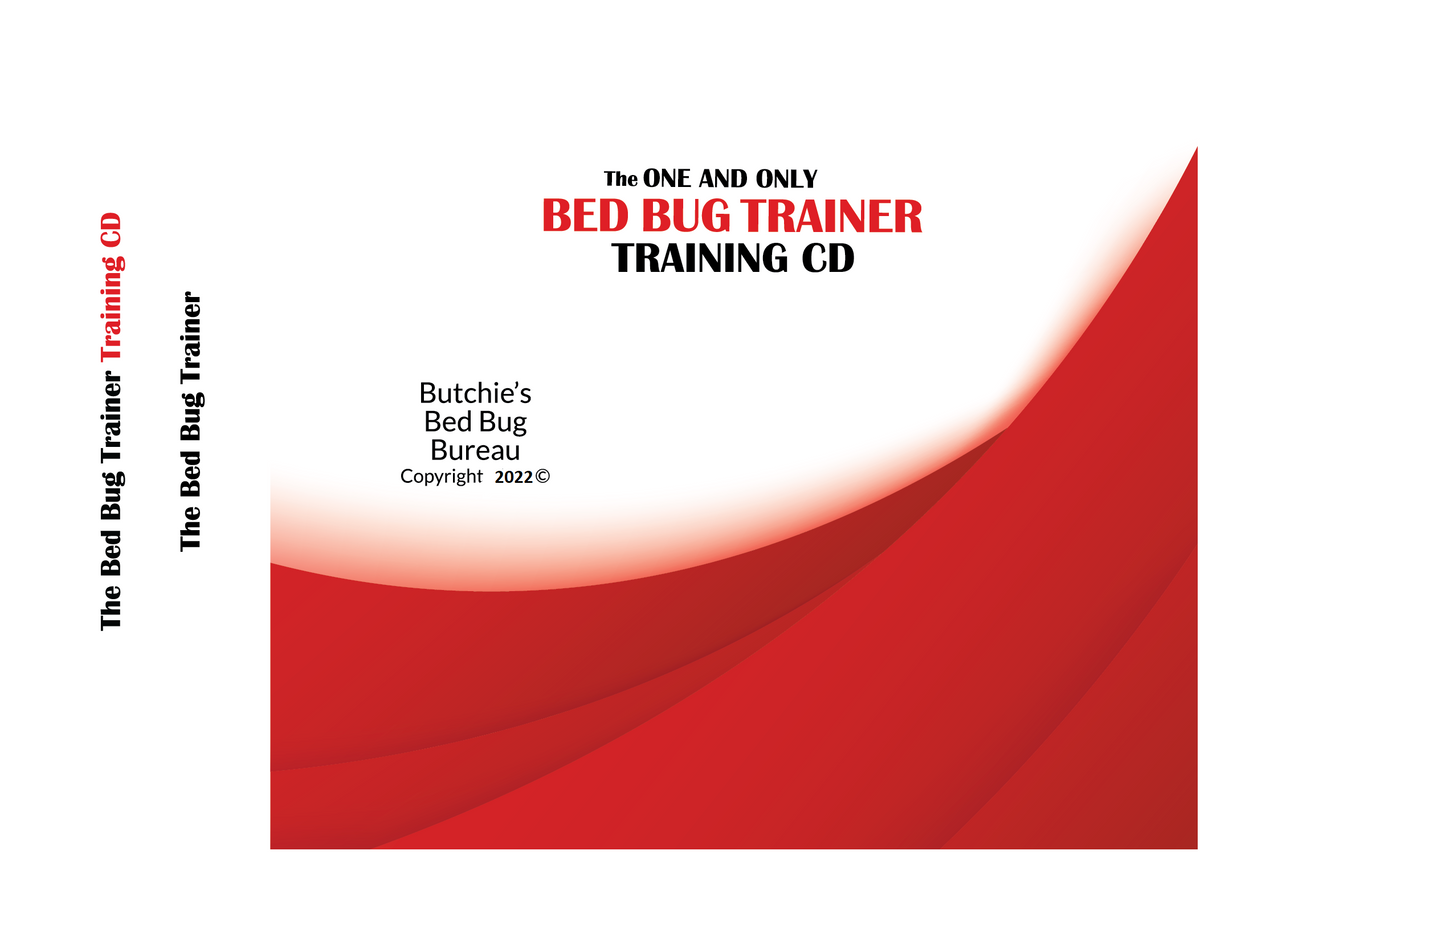 "The Bed Bug Trainer" CD-Rom